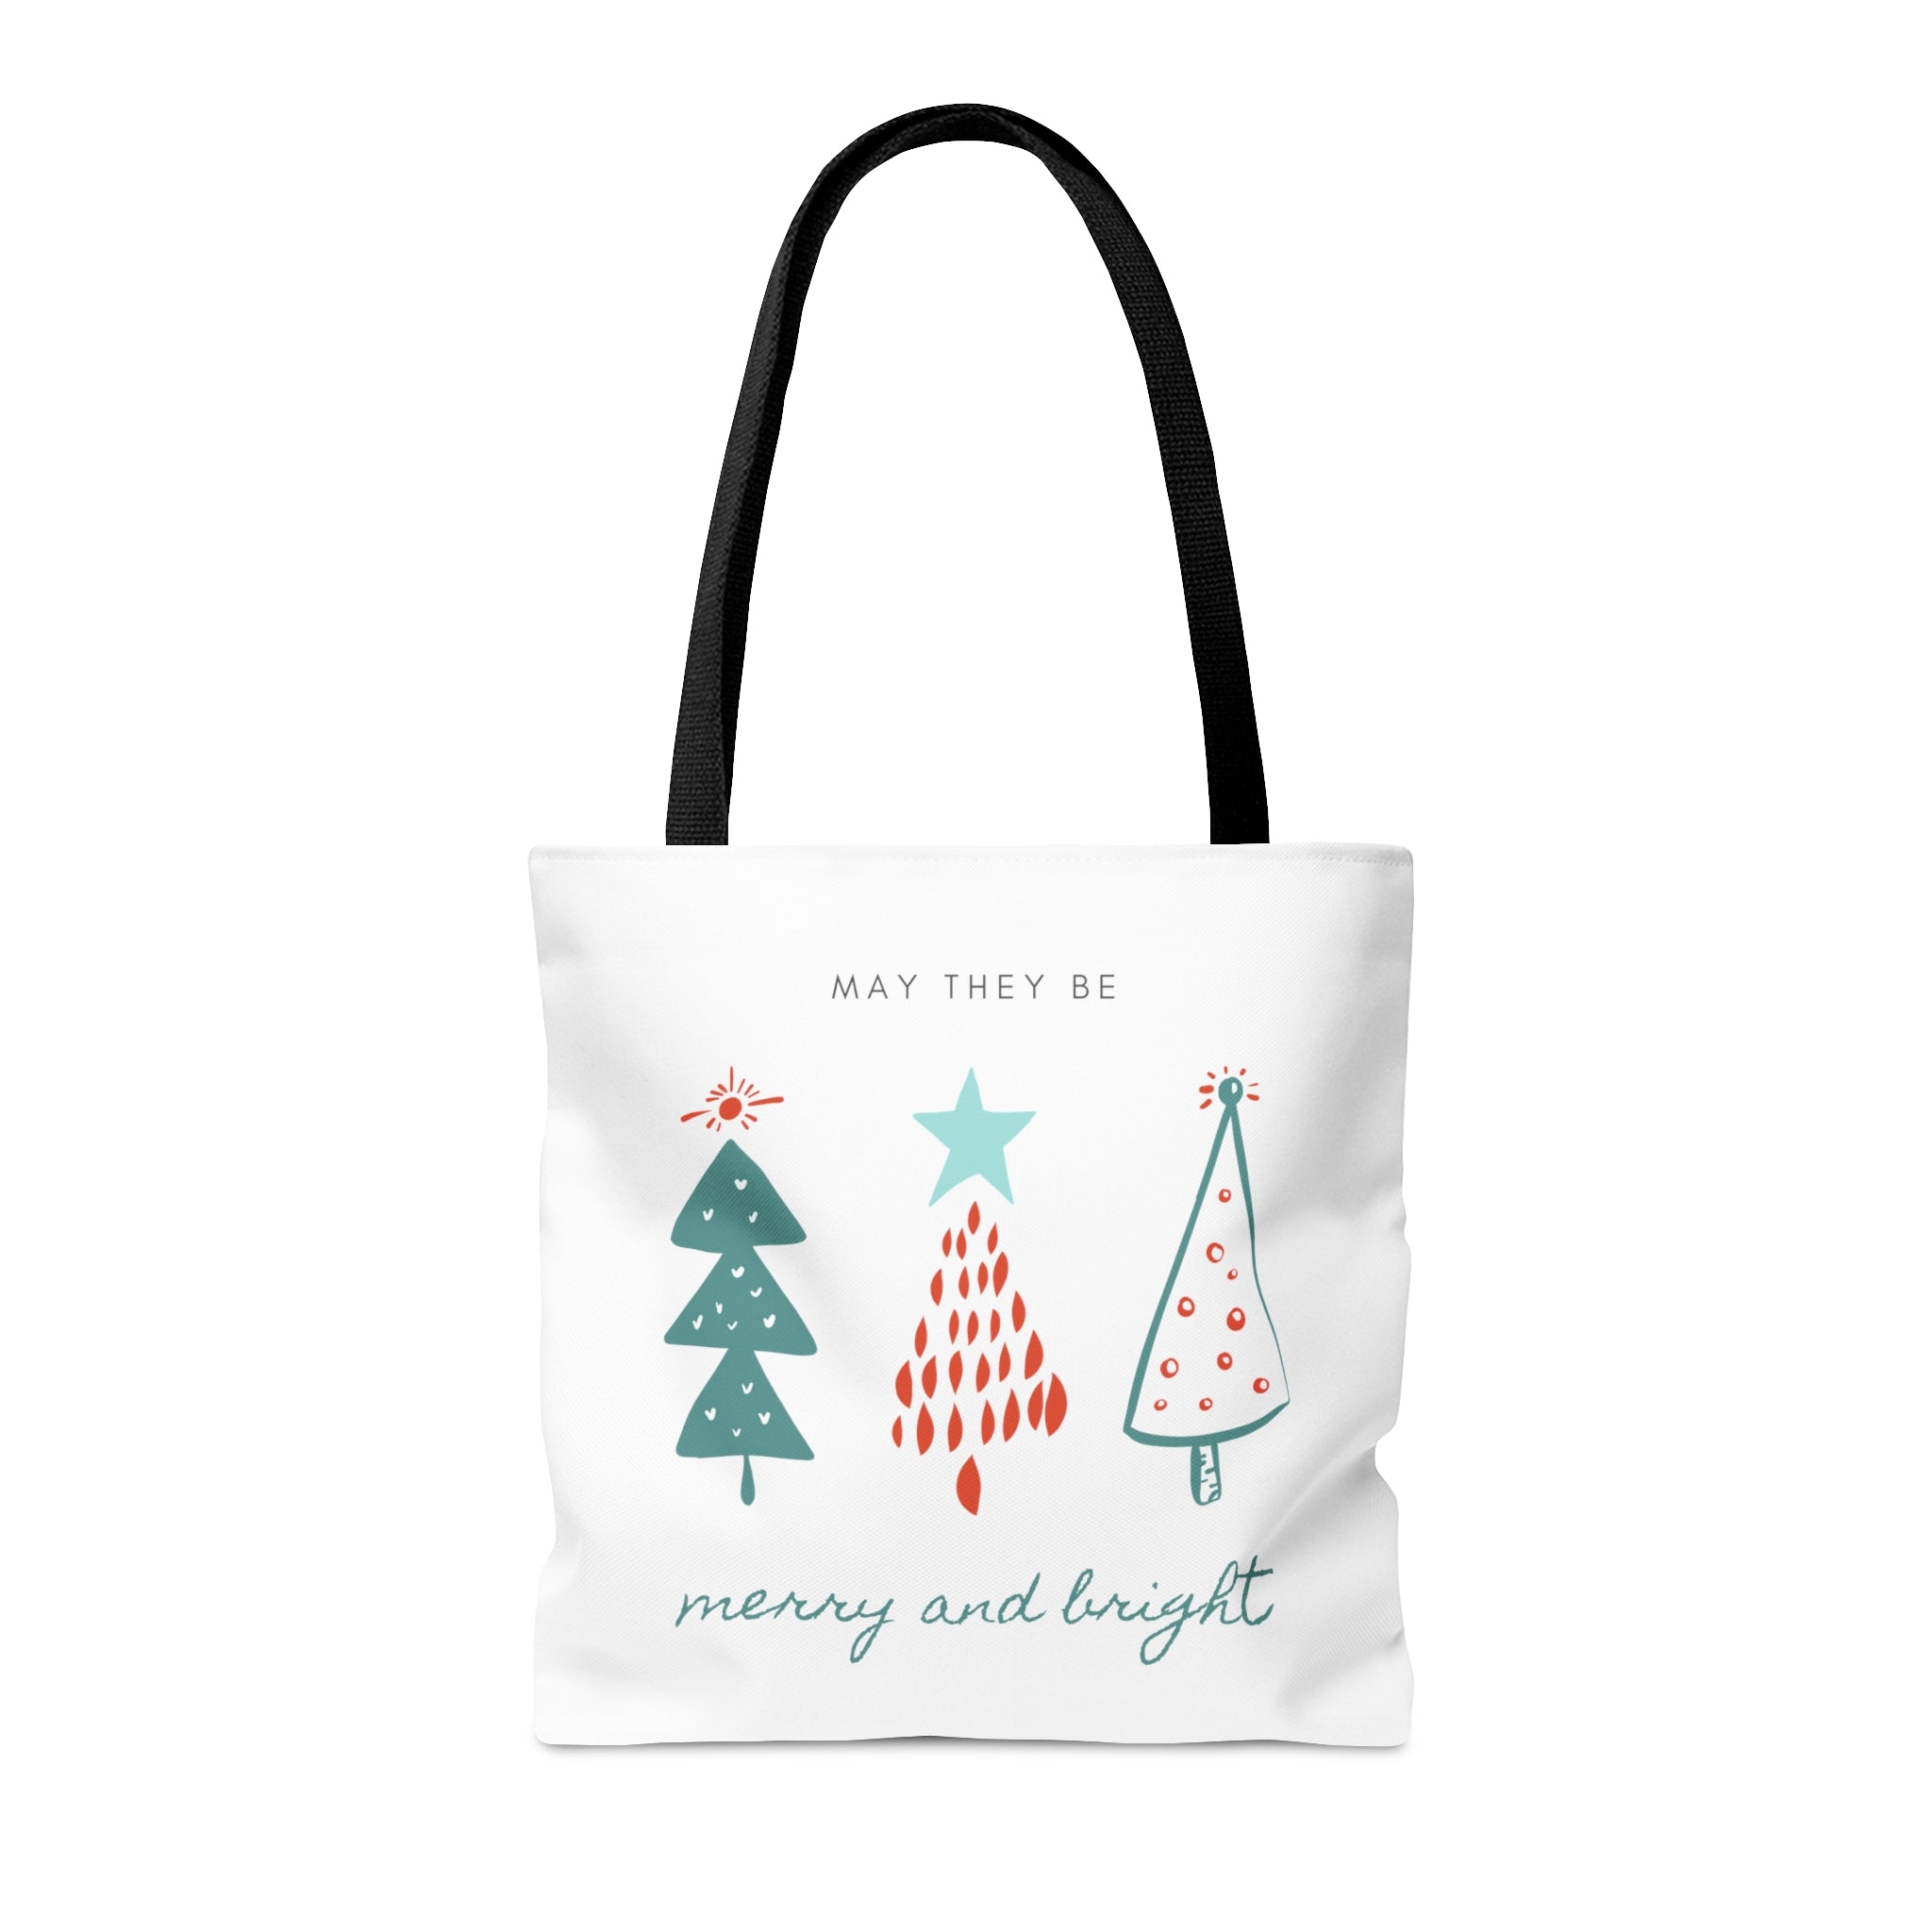 Hapy Holidays Christmas Tote Bags White, Reusable Canvas Tote Bags, Available in Different Size